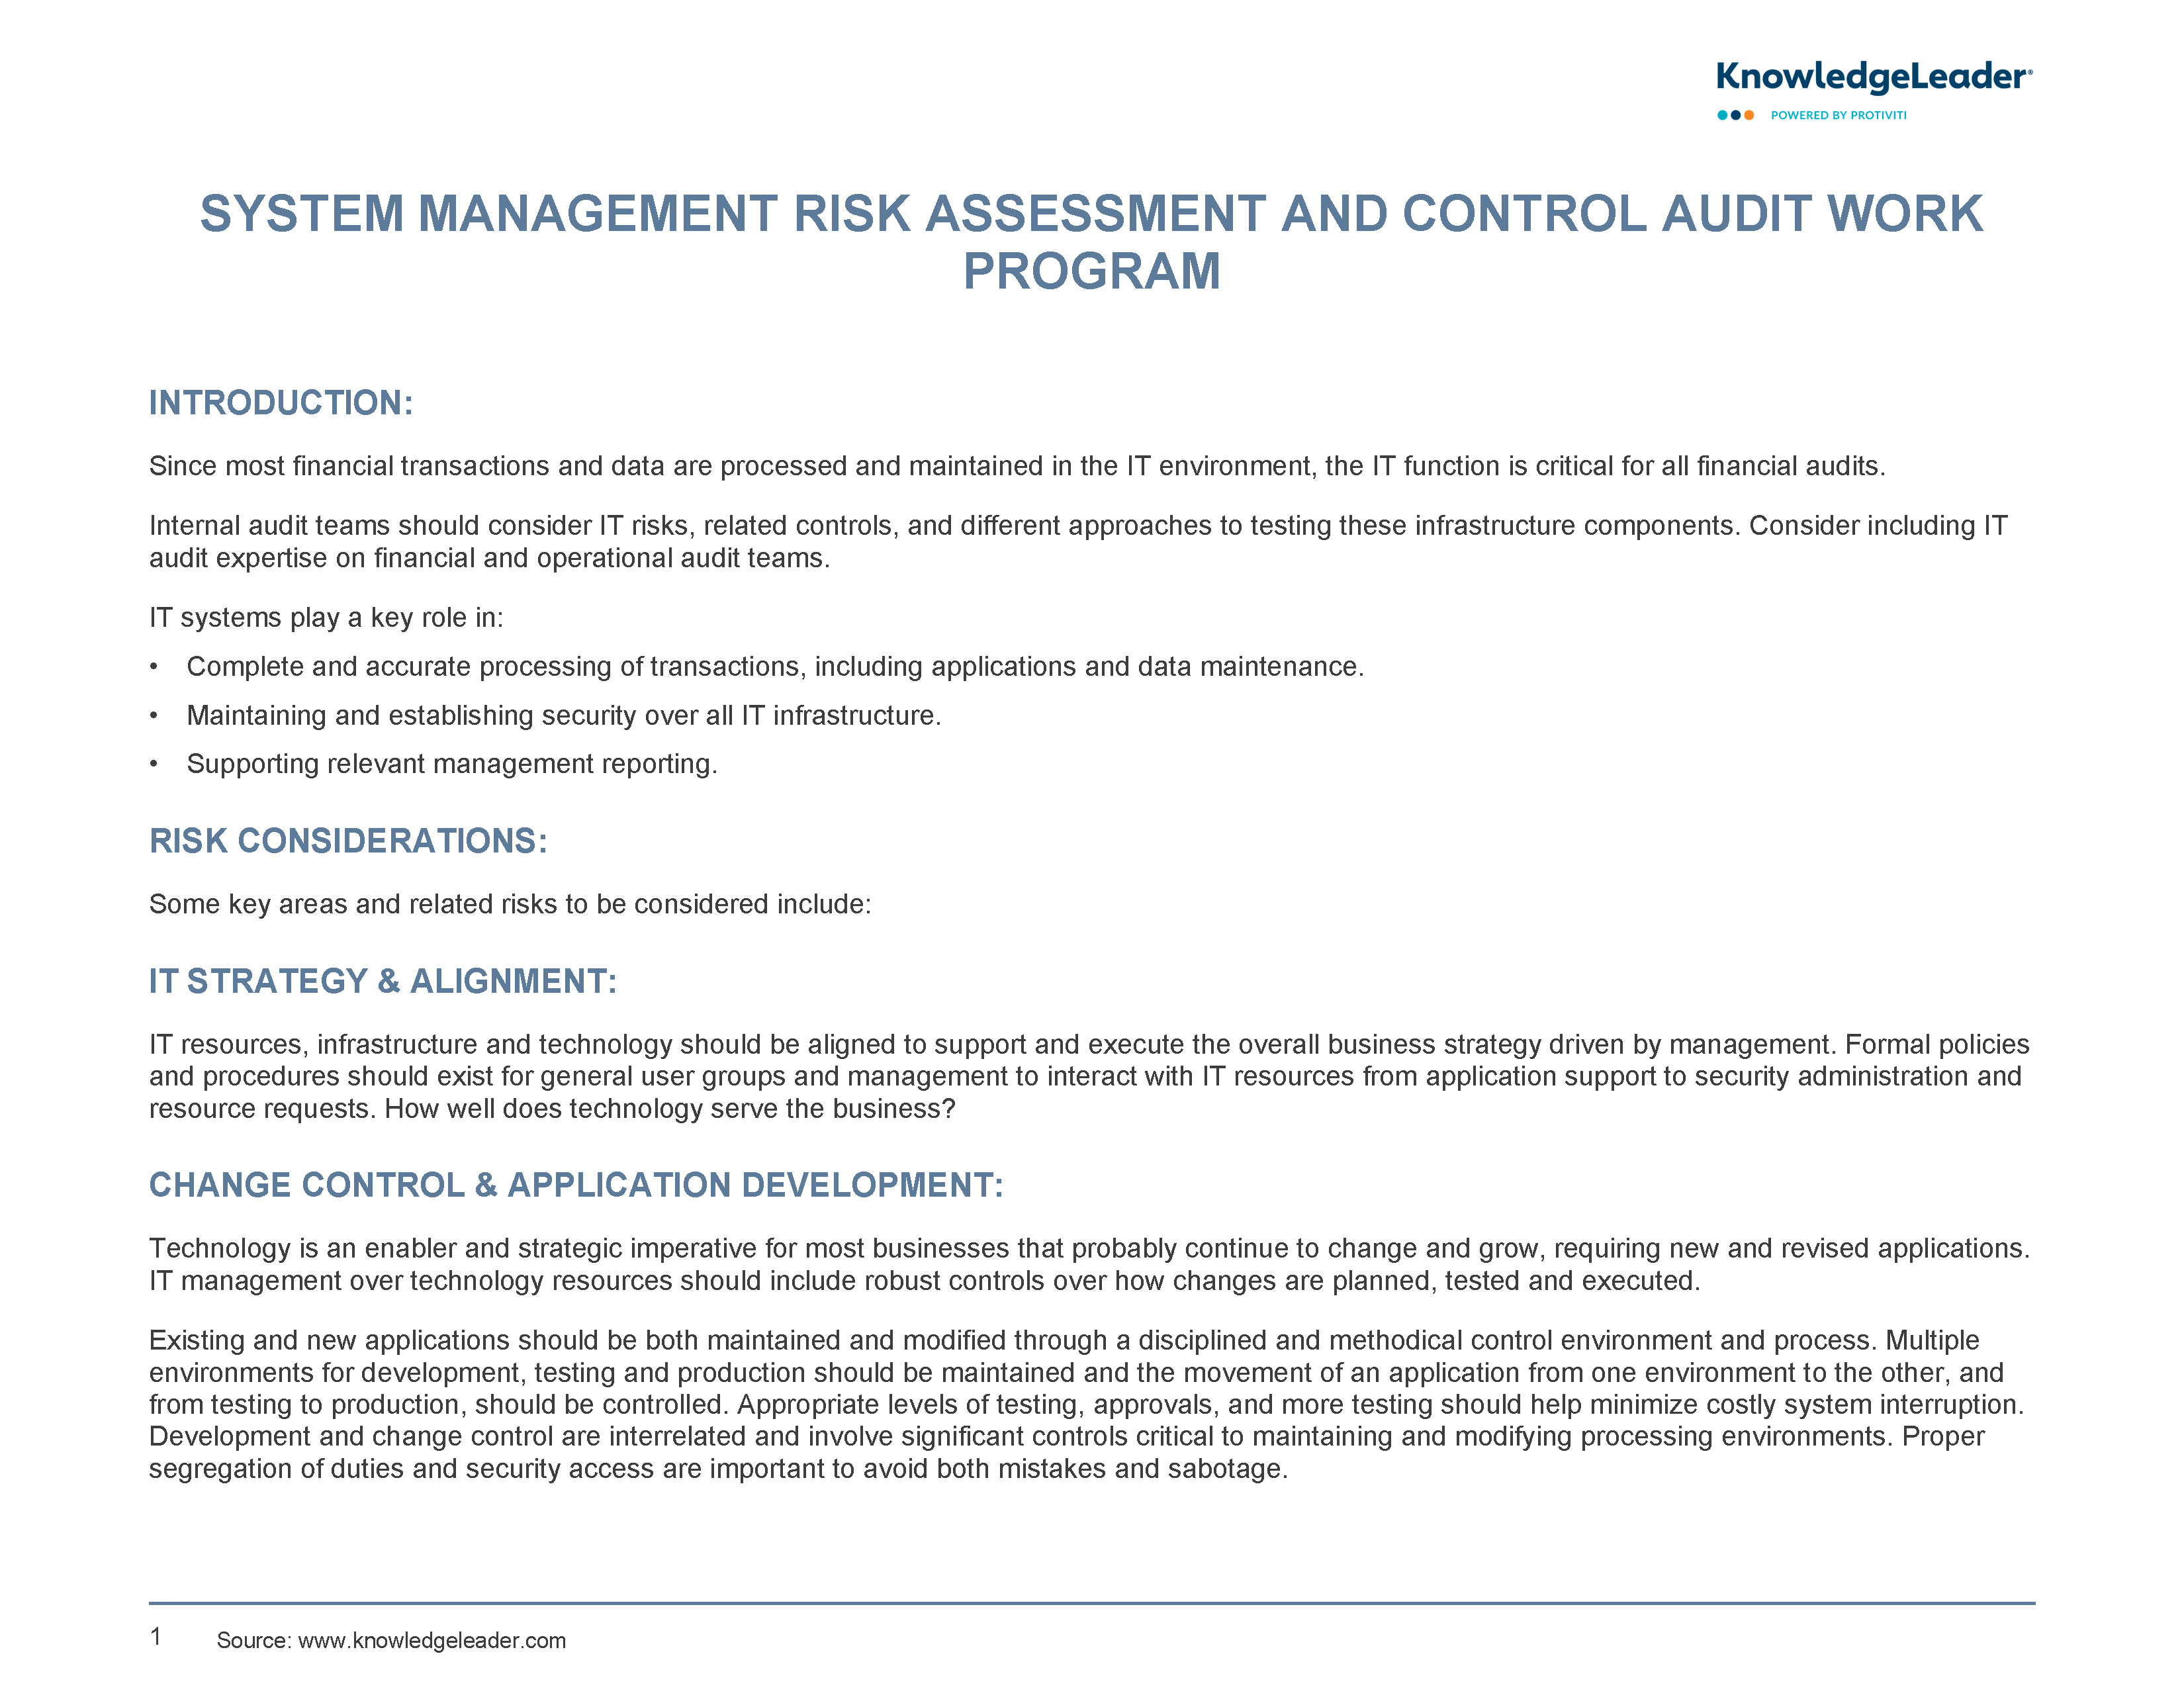 Screenshot of the first page of System Management Risk Assessment and Control Audit Work Program